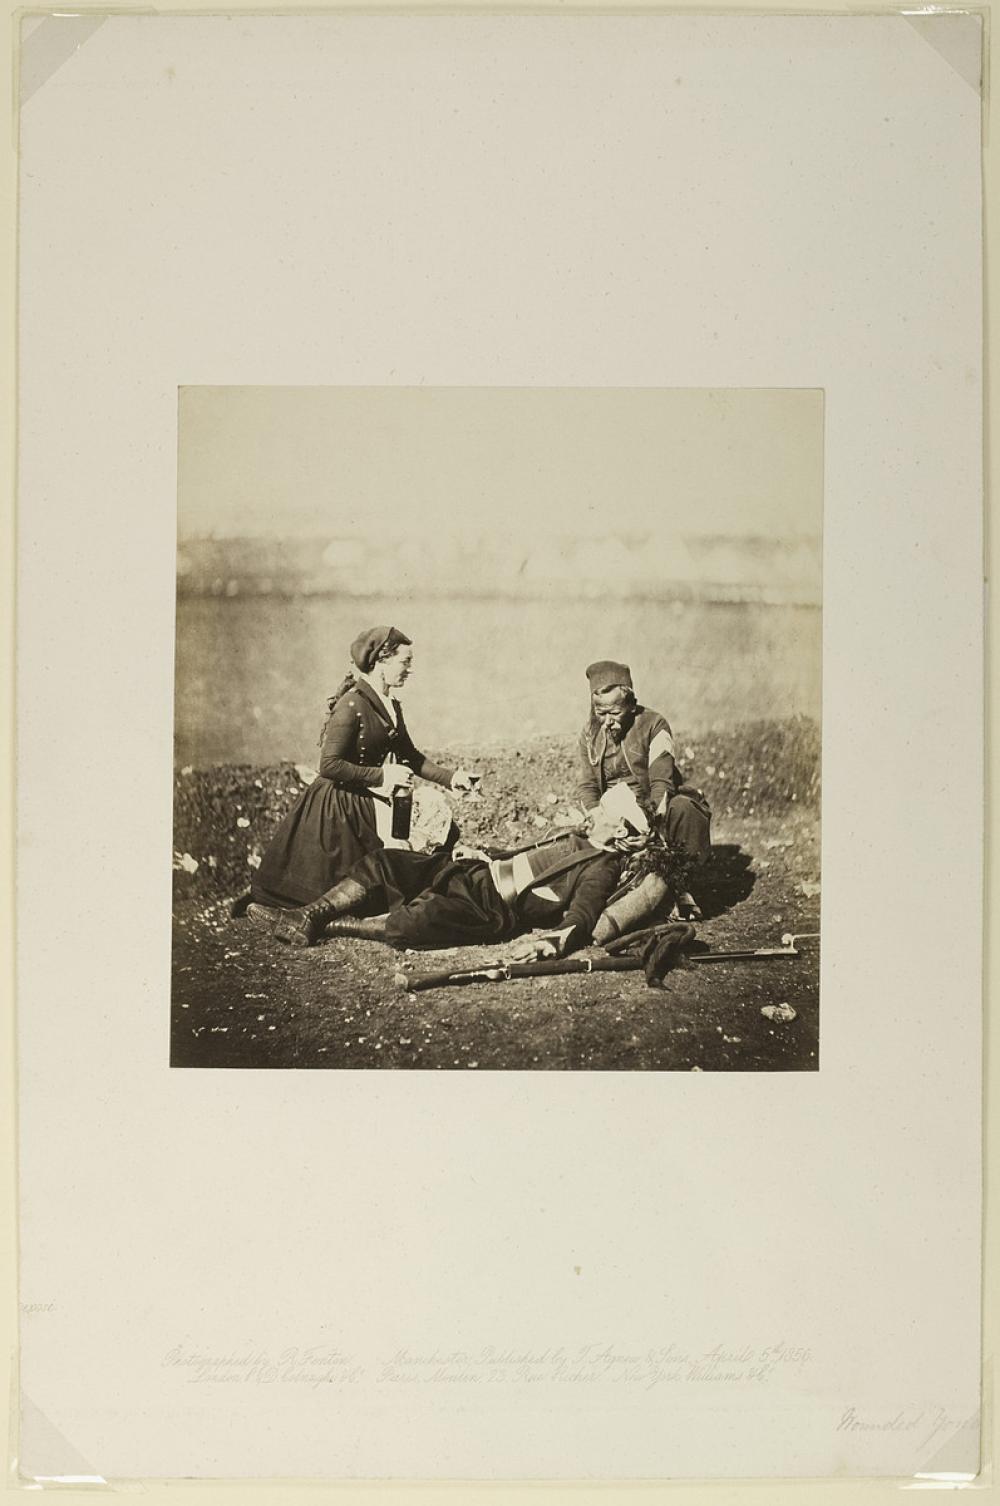 Fenton, Roger, Wounded Zouave